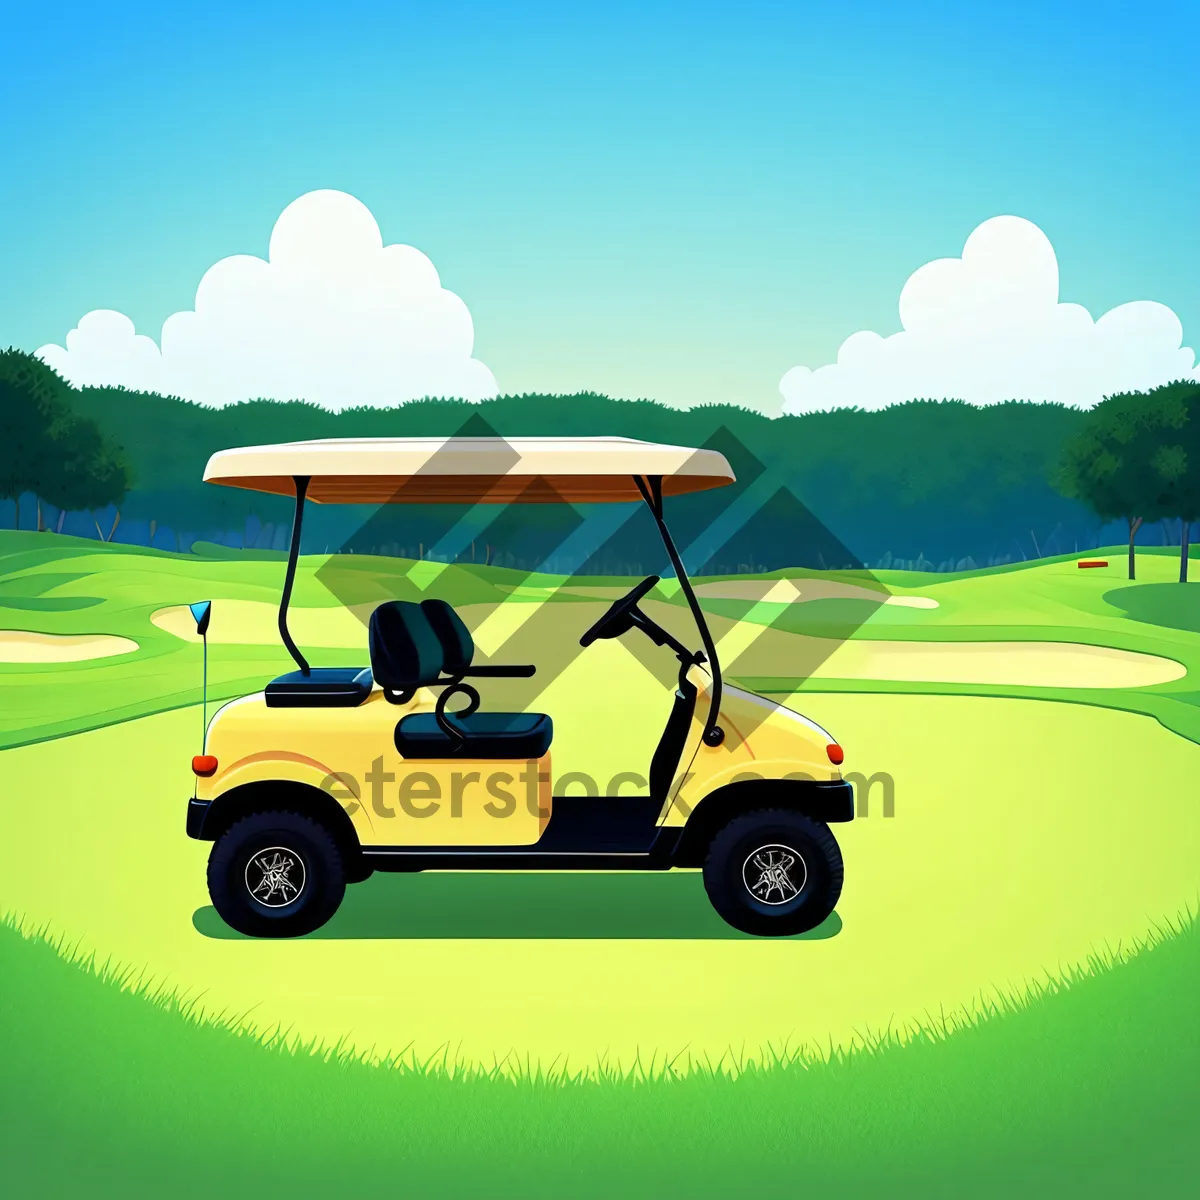 Picture of Golf Cart on Course: Sports Transportation for Golfers